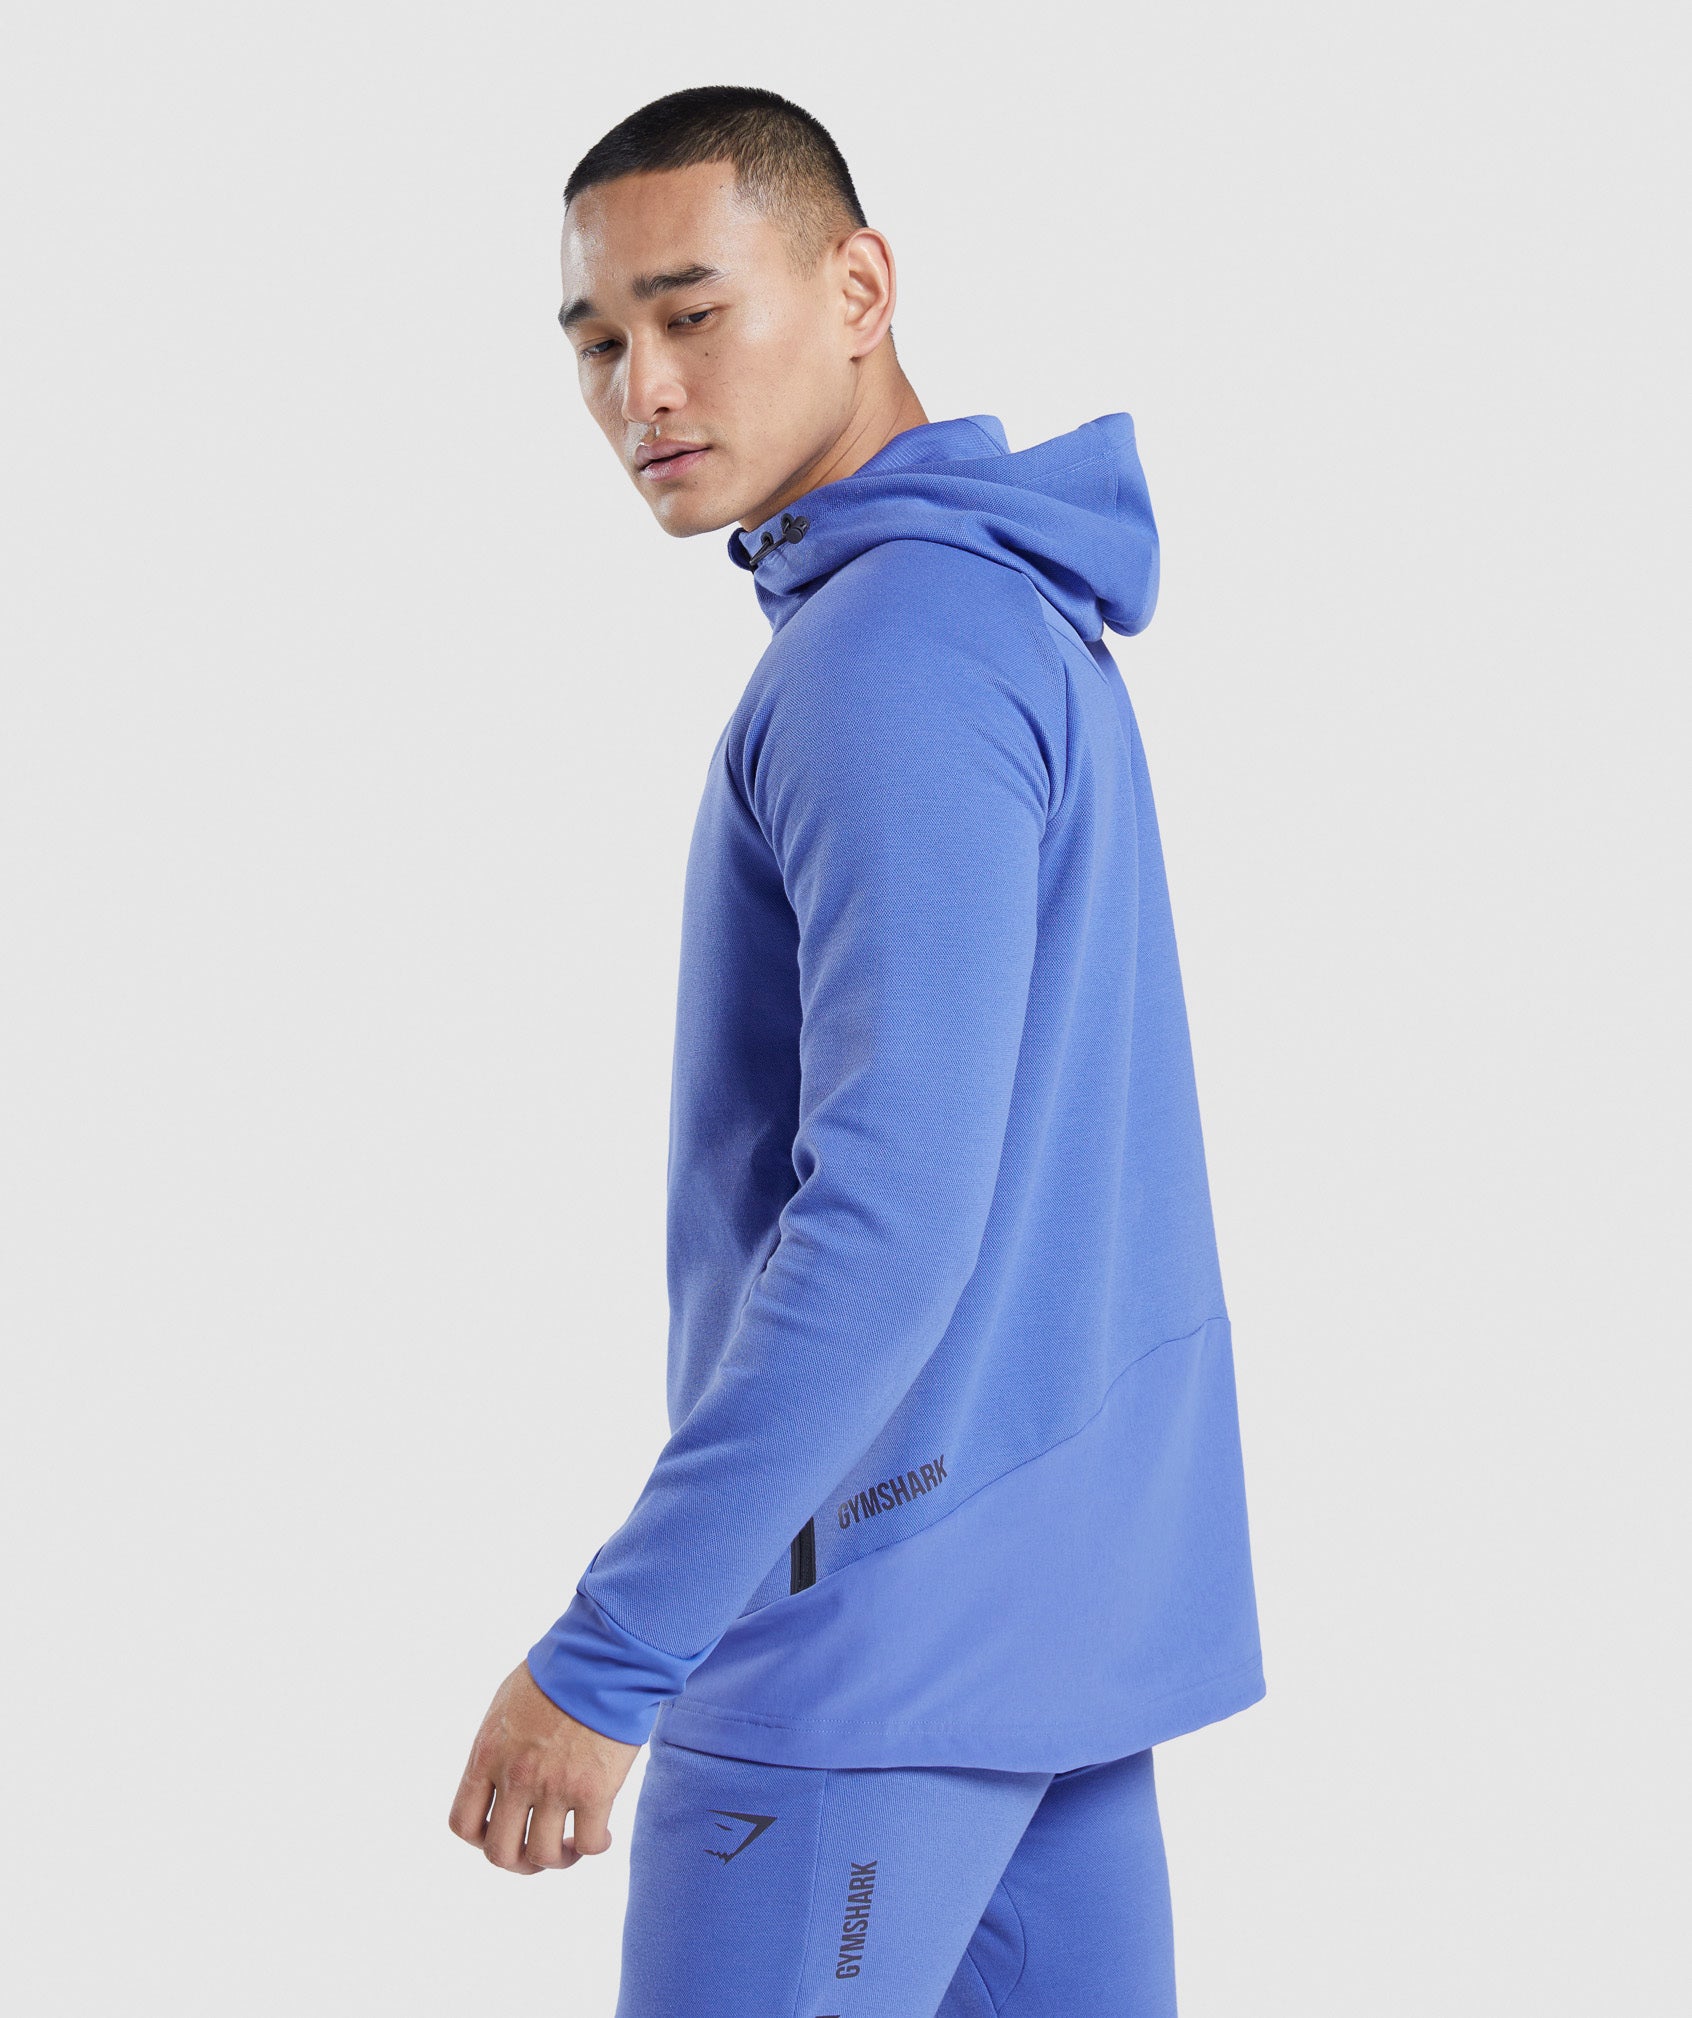 Apex Technical Jacket in Court Blue - view 3